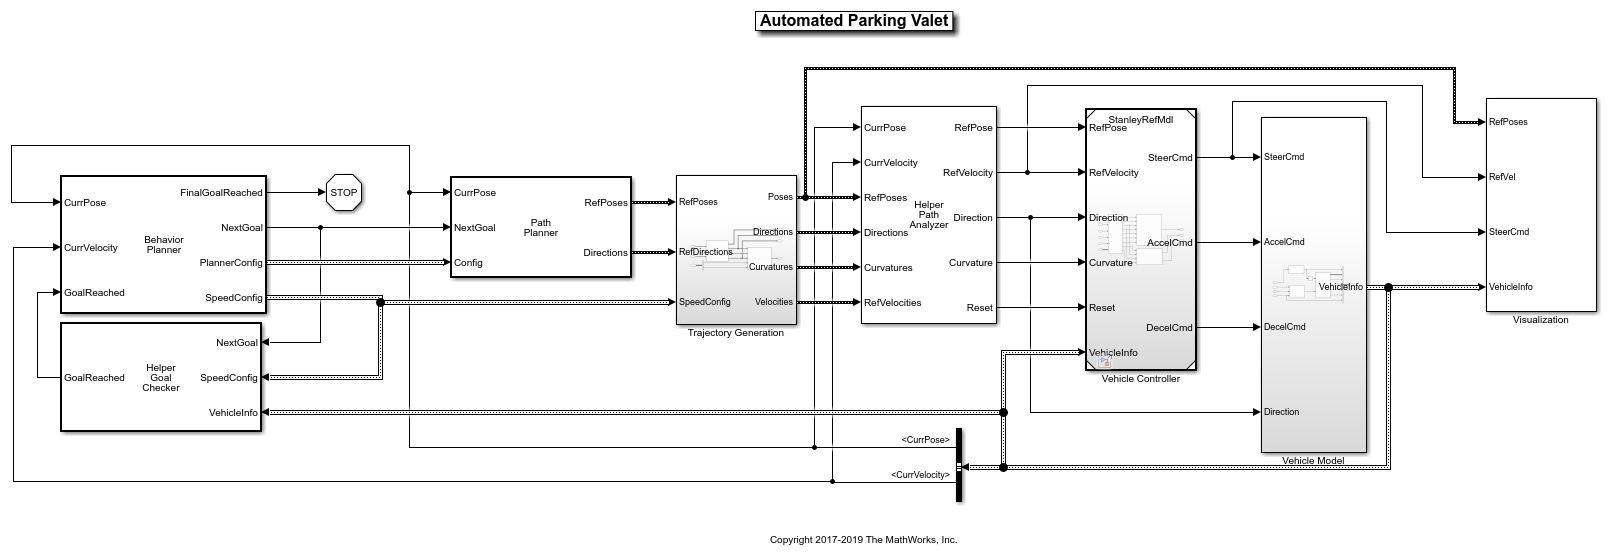 Automated Parking Valet in Simulink